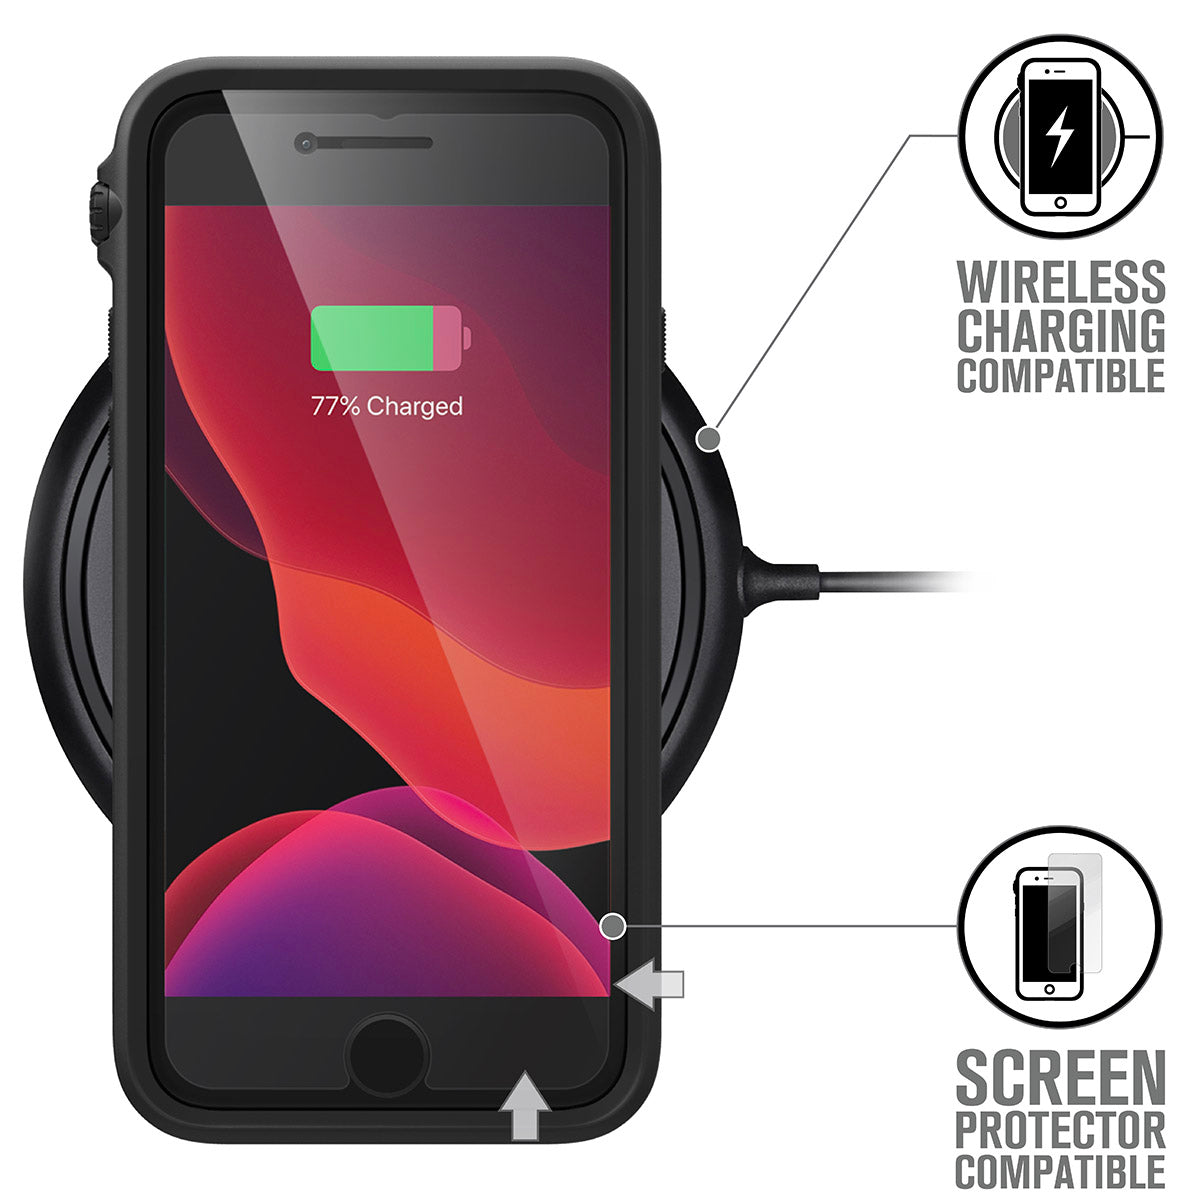 Catalyst iphone 8/7 impact protection case for iphone se showing wireless charging in a stealth black colorway text reads wireless charging compatible screen protector compatible  